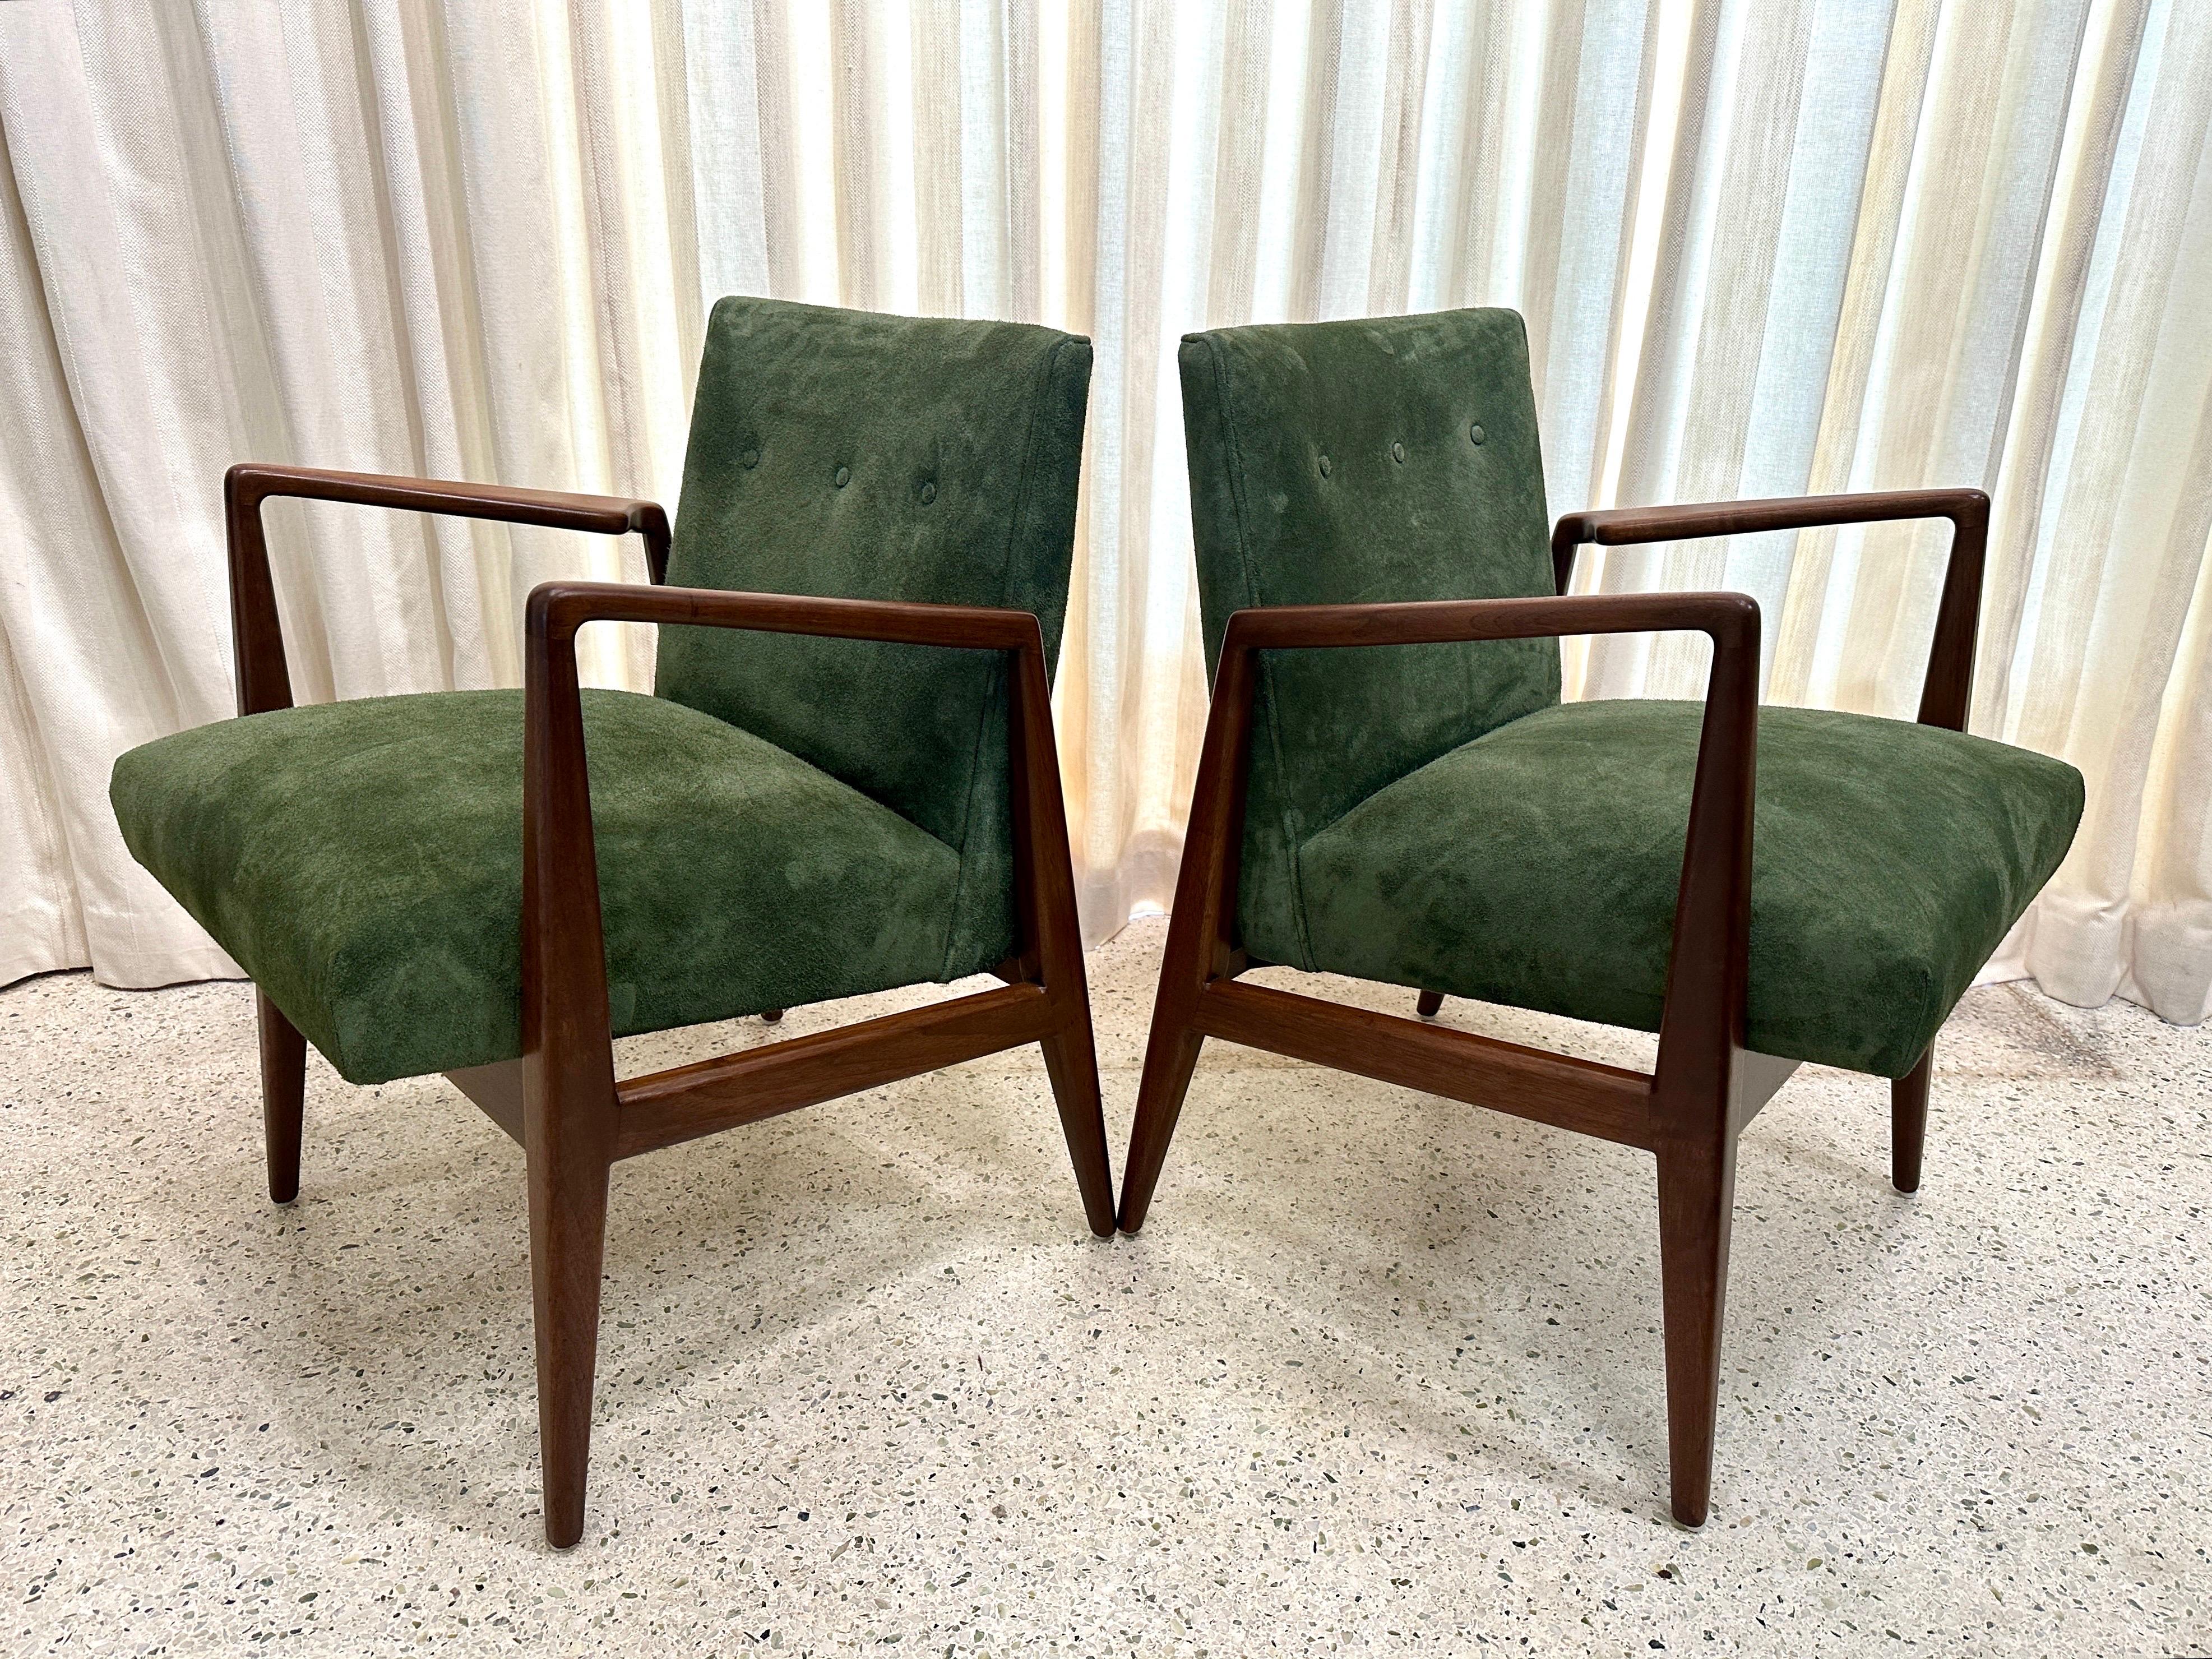 Original Vintage Jens Risom Armchairs in Green Suede w/ Label, PAIR For Sale 4